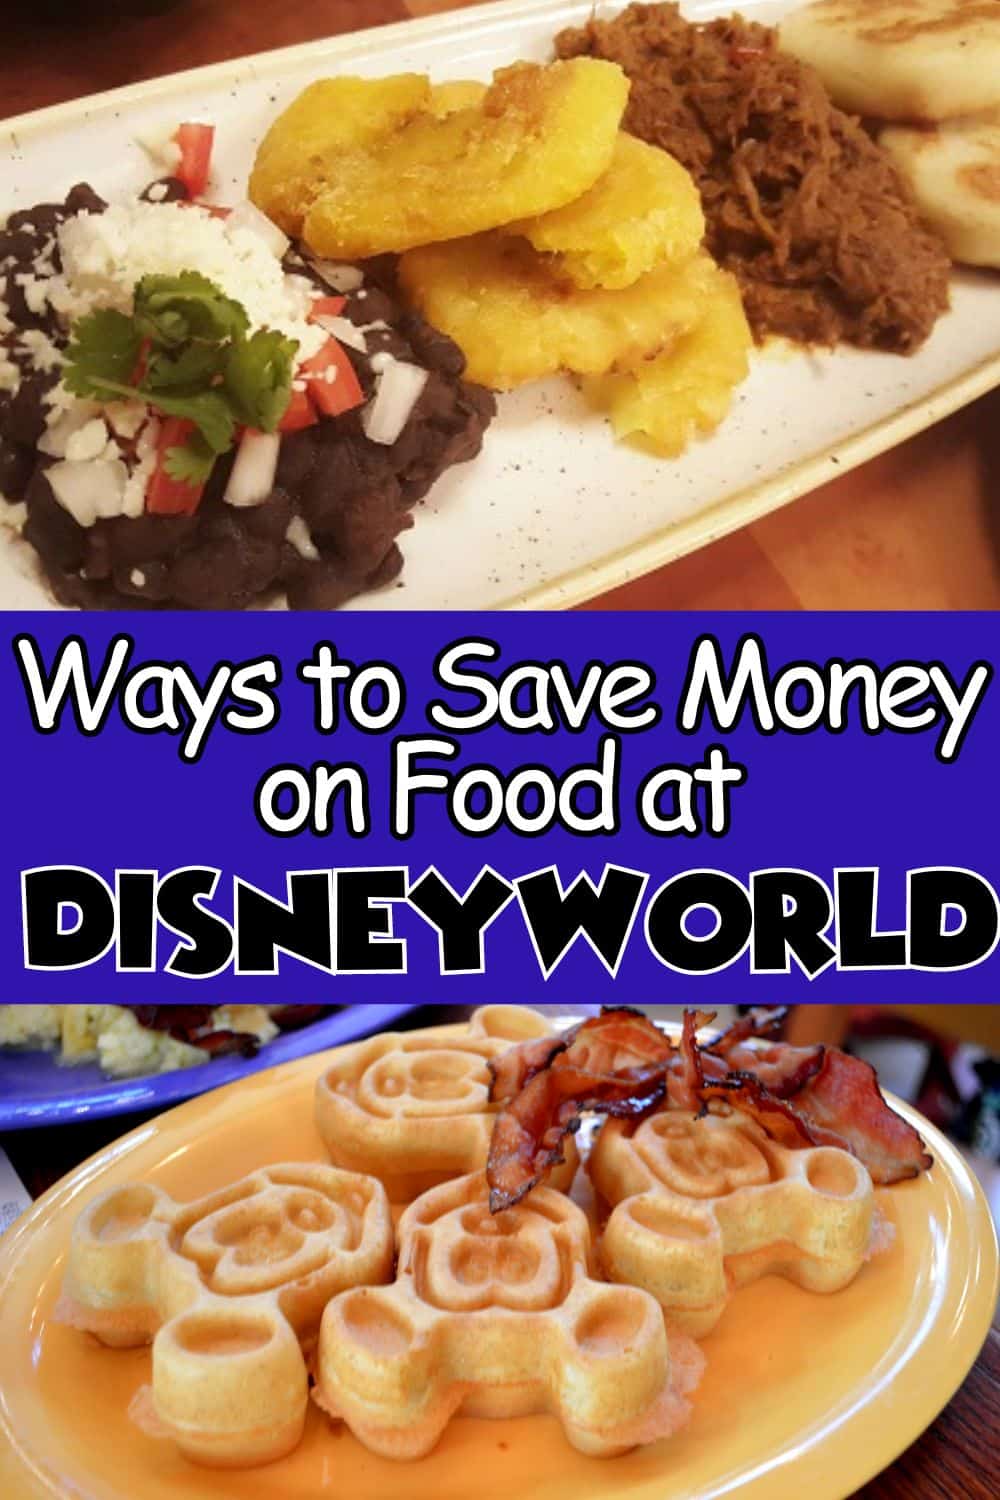 How to Save Money on Food at Disney World